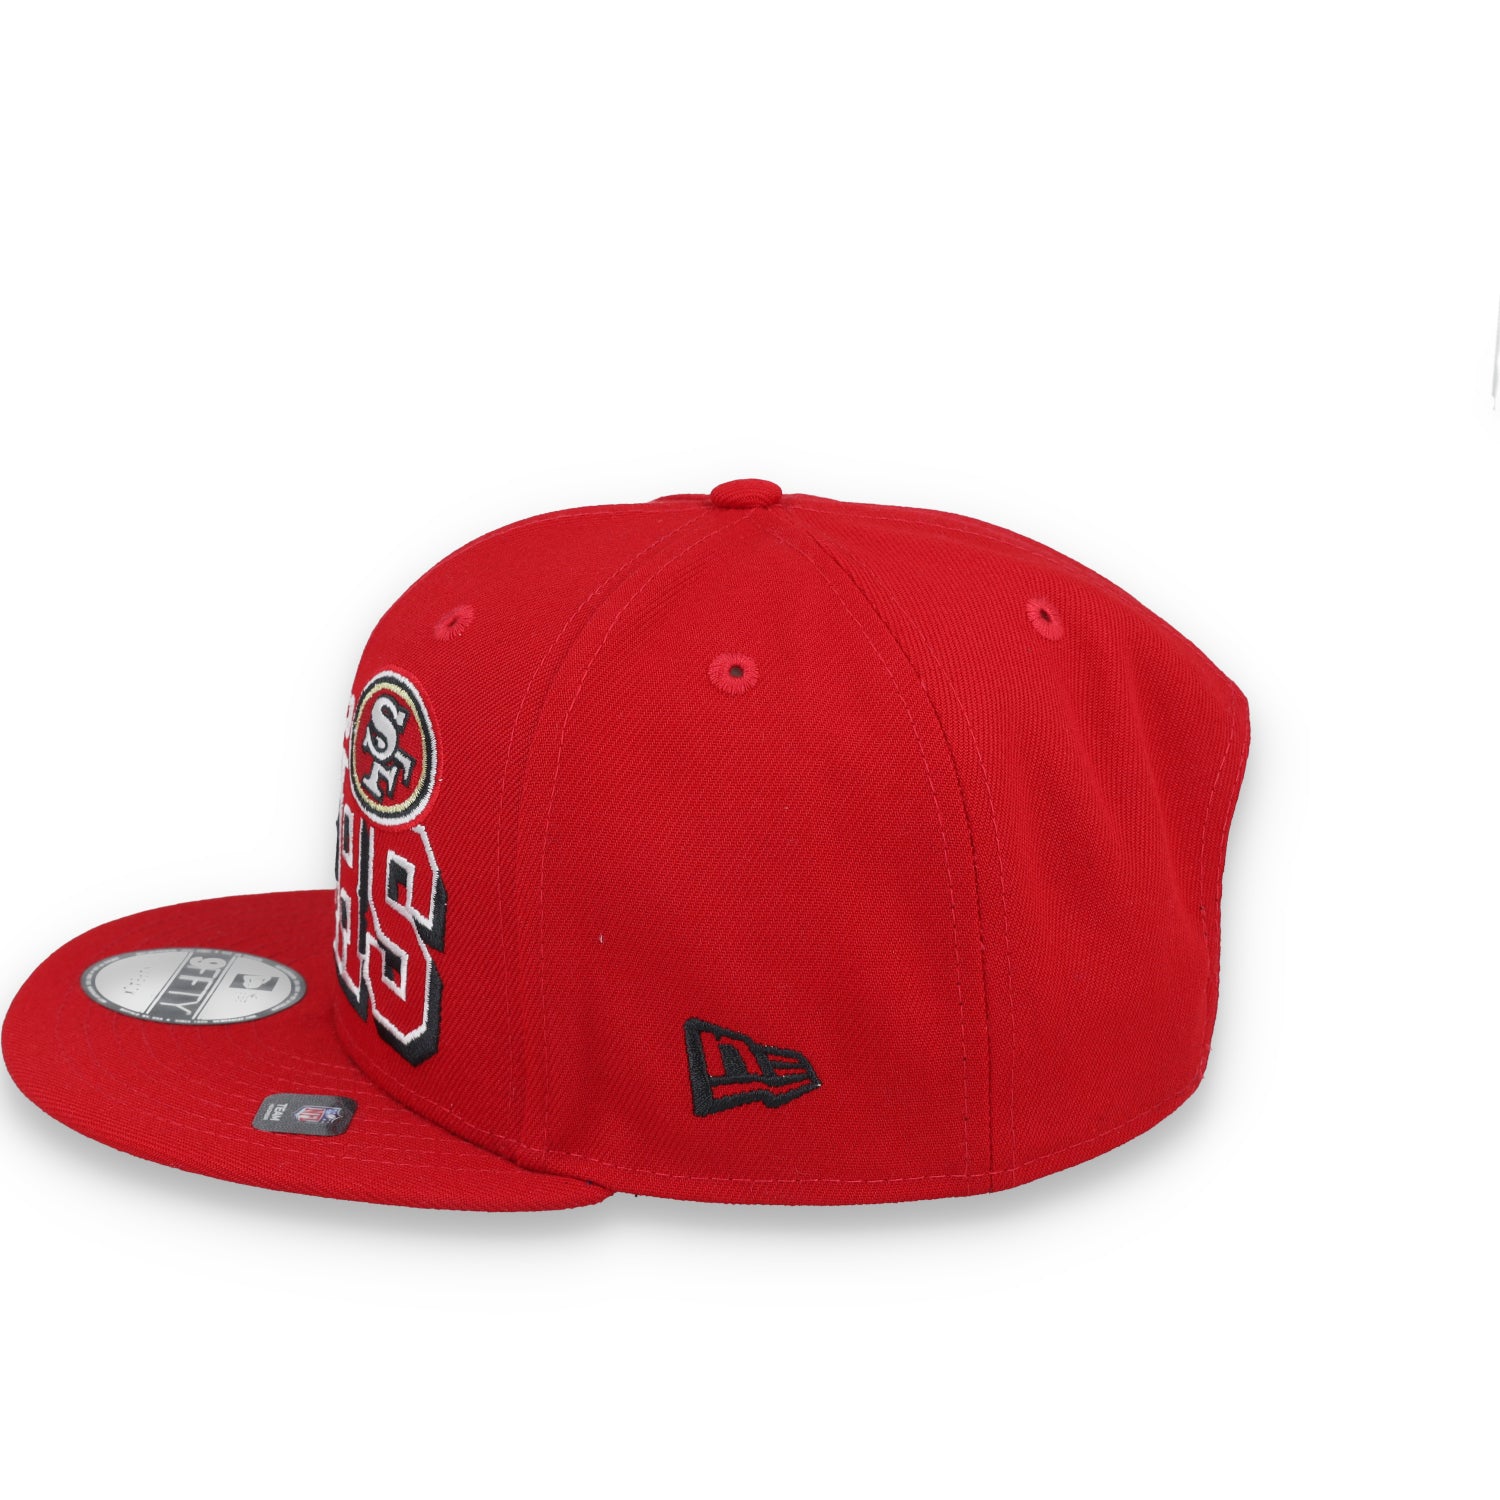 New Era San Francisco 49ers Game Day 9FIFTY Snapback Hat